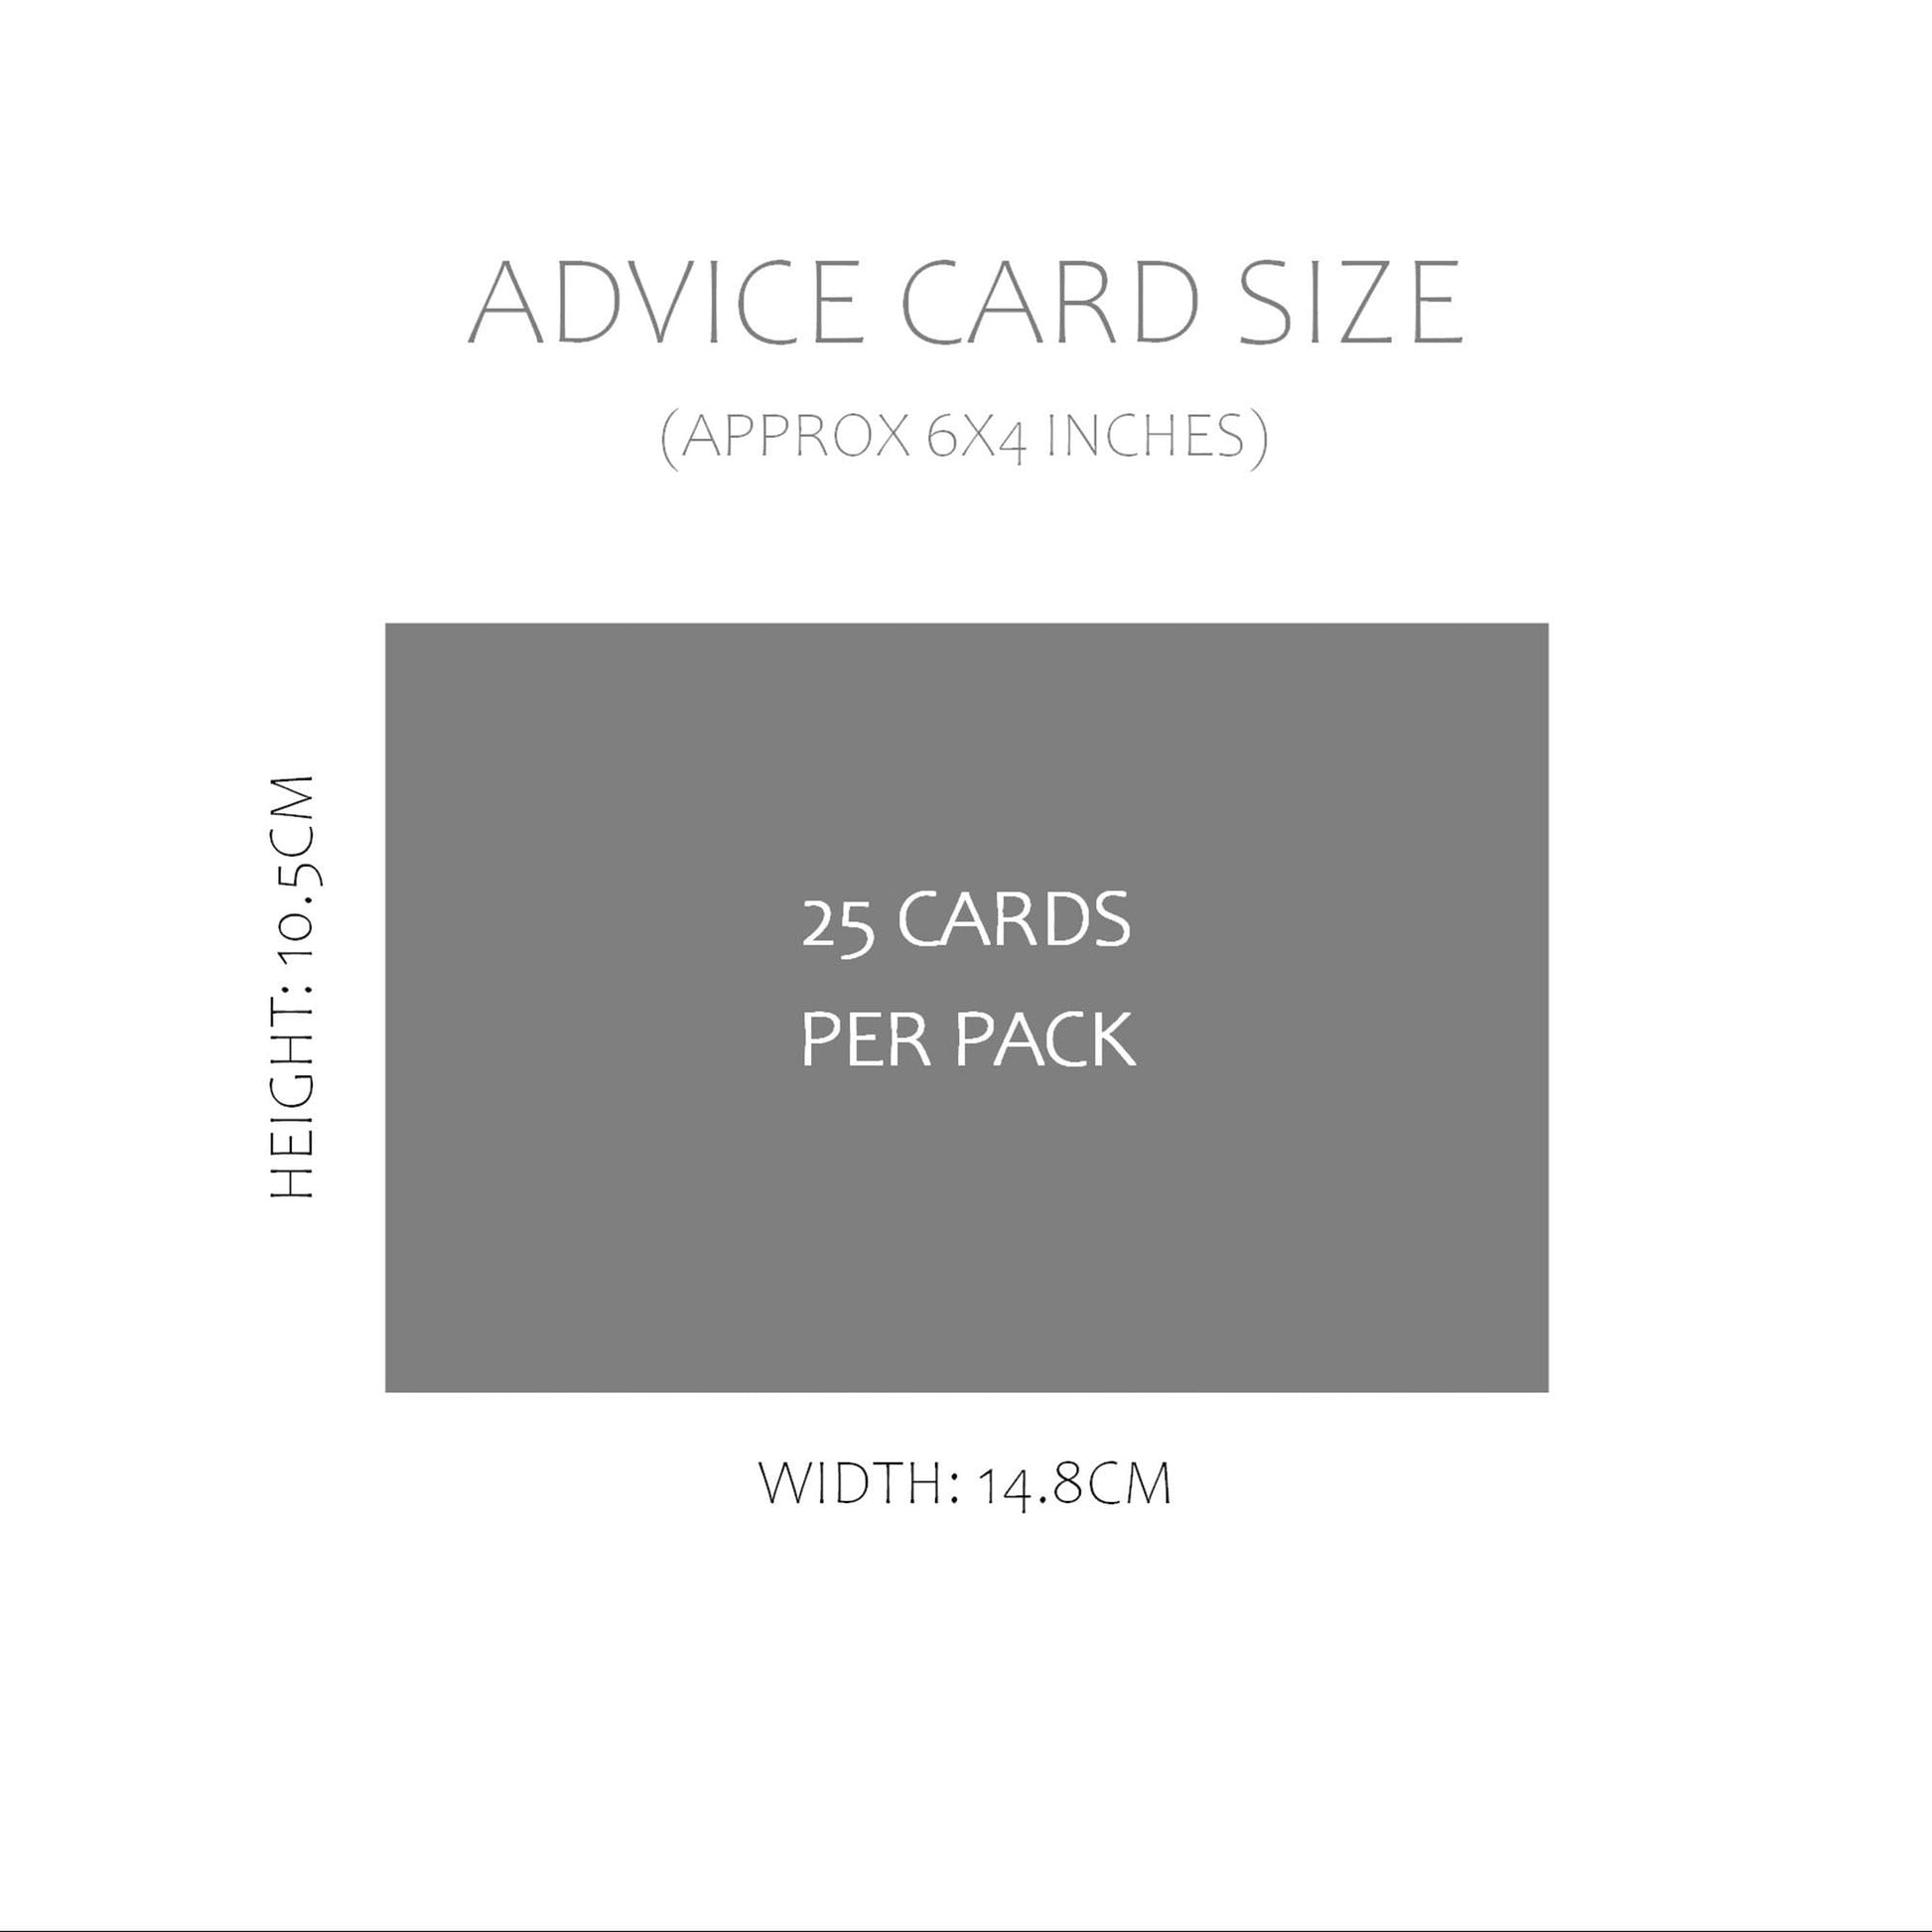 Black & Gold Wedding Advice Cards - Pack Of 25